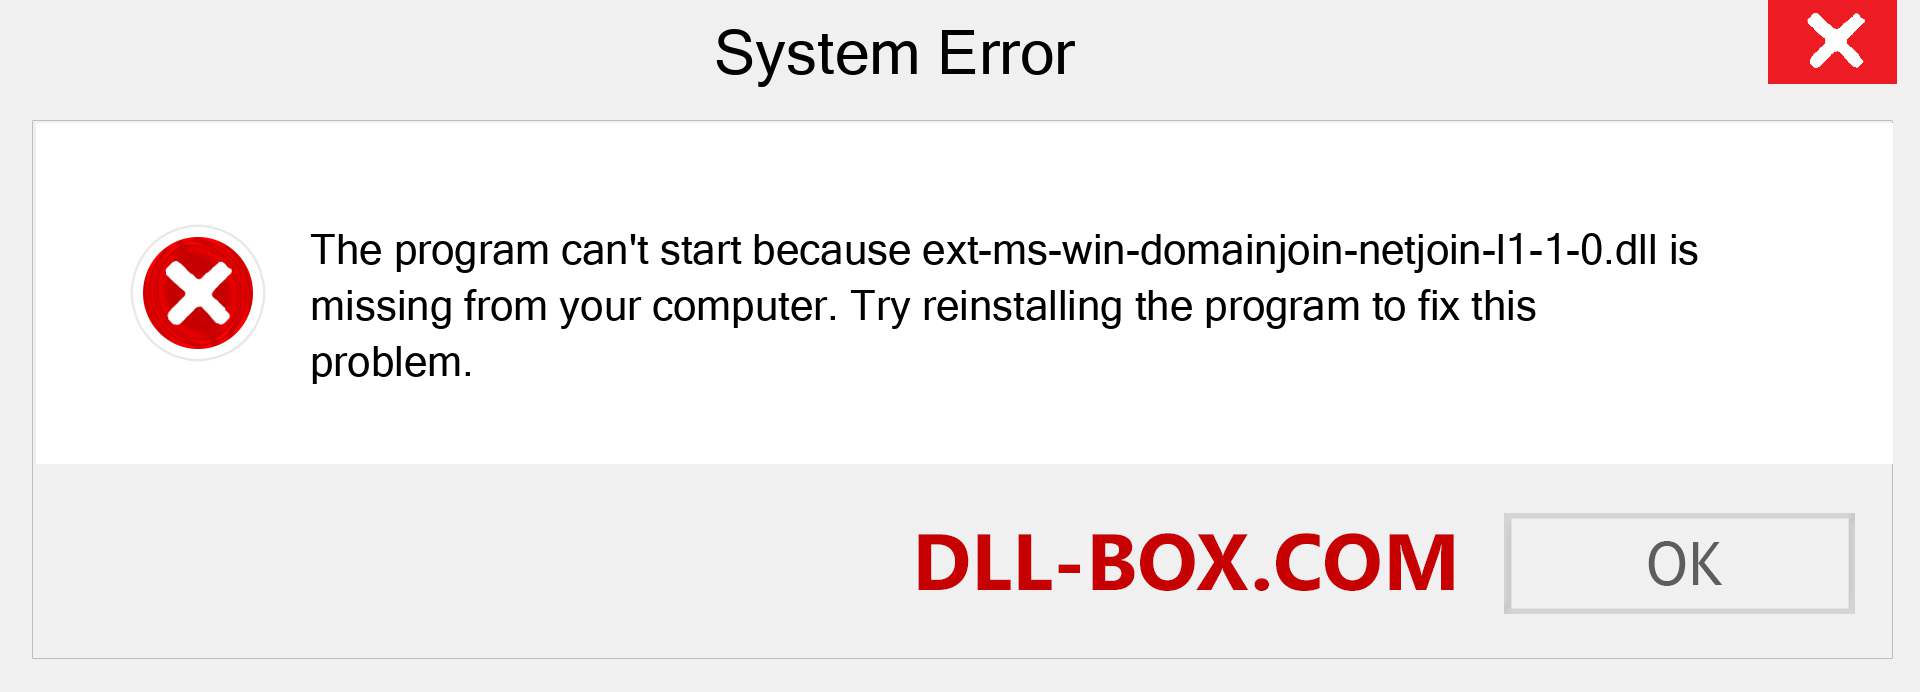  ext-ms-win-domainjoin-netjoin-l1-1-0.dll file is missing?. Download for Windows 7, 8, 10 - Fix  ext-ms-win-domainjoin-netjoin-l1-1-0 dll Missing Error on Windows, photos, images